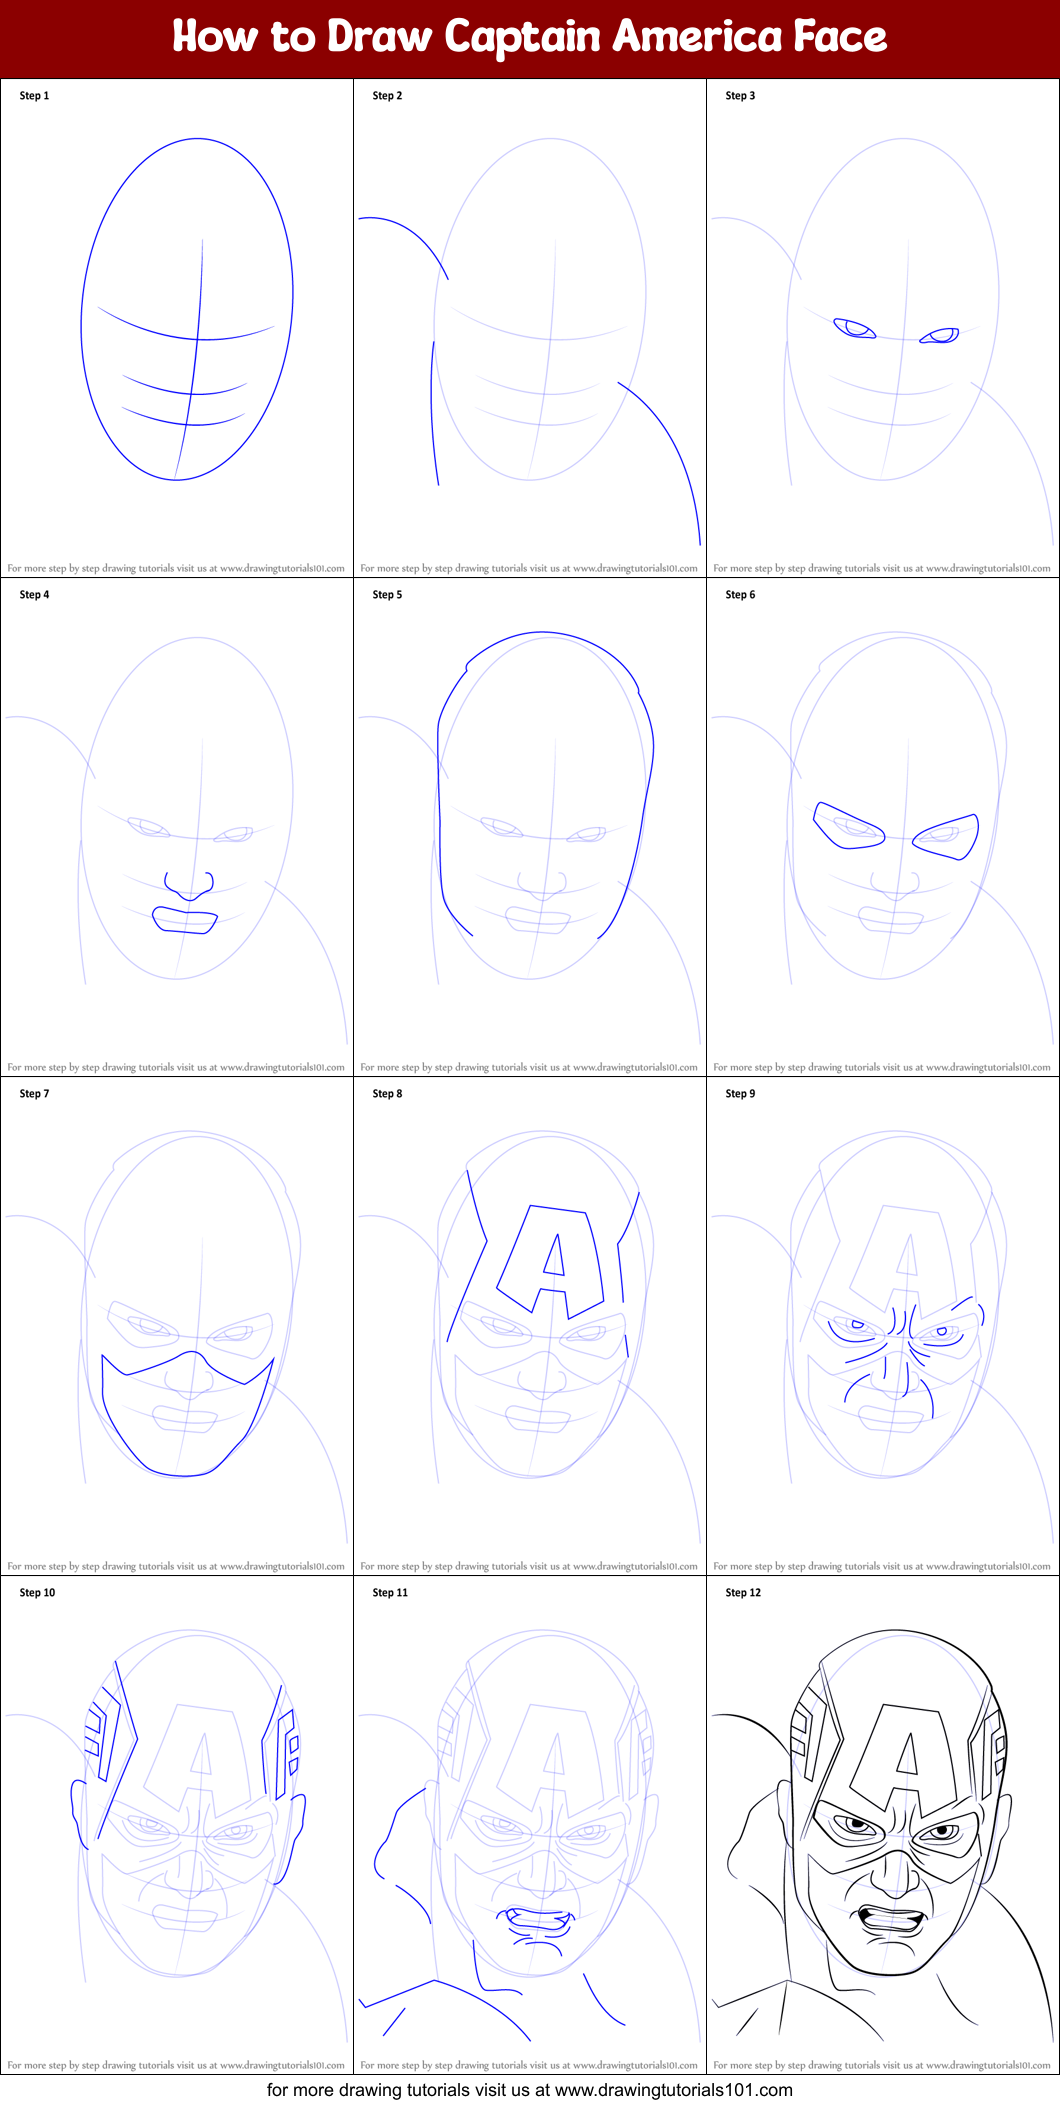 How to draw Captain America / qbife6oik.png / LetsDrawIt